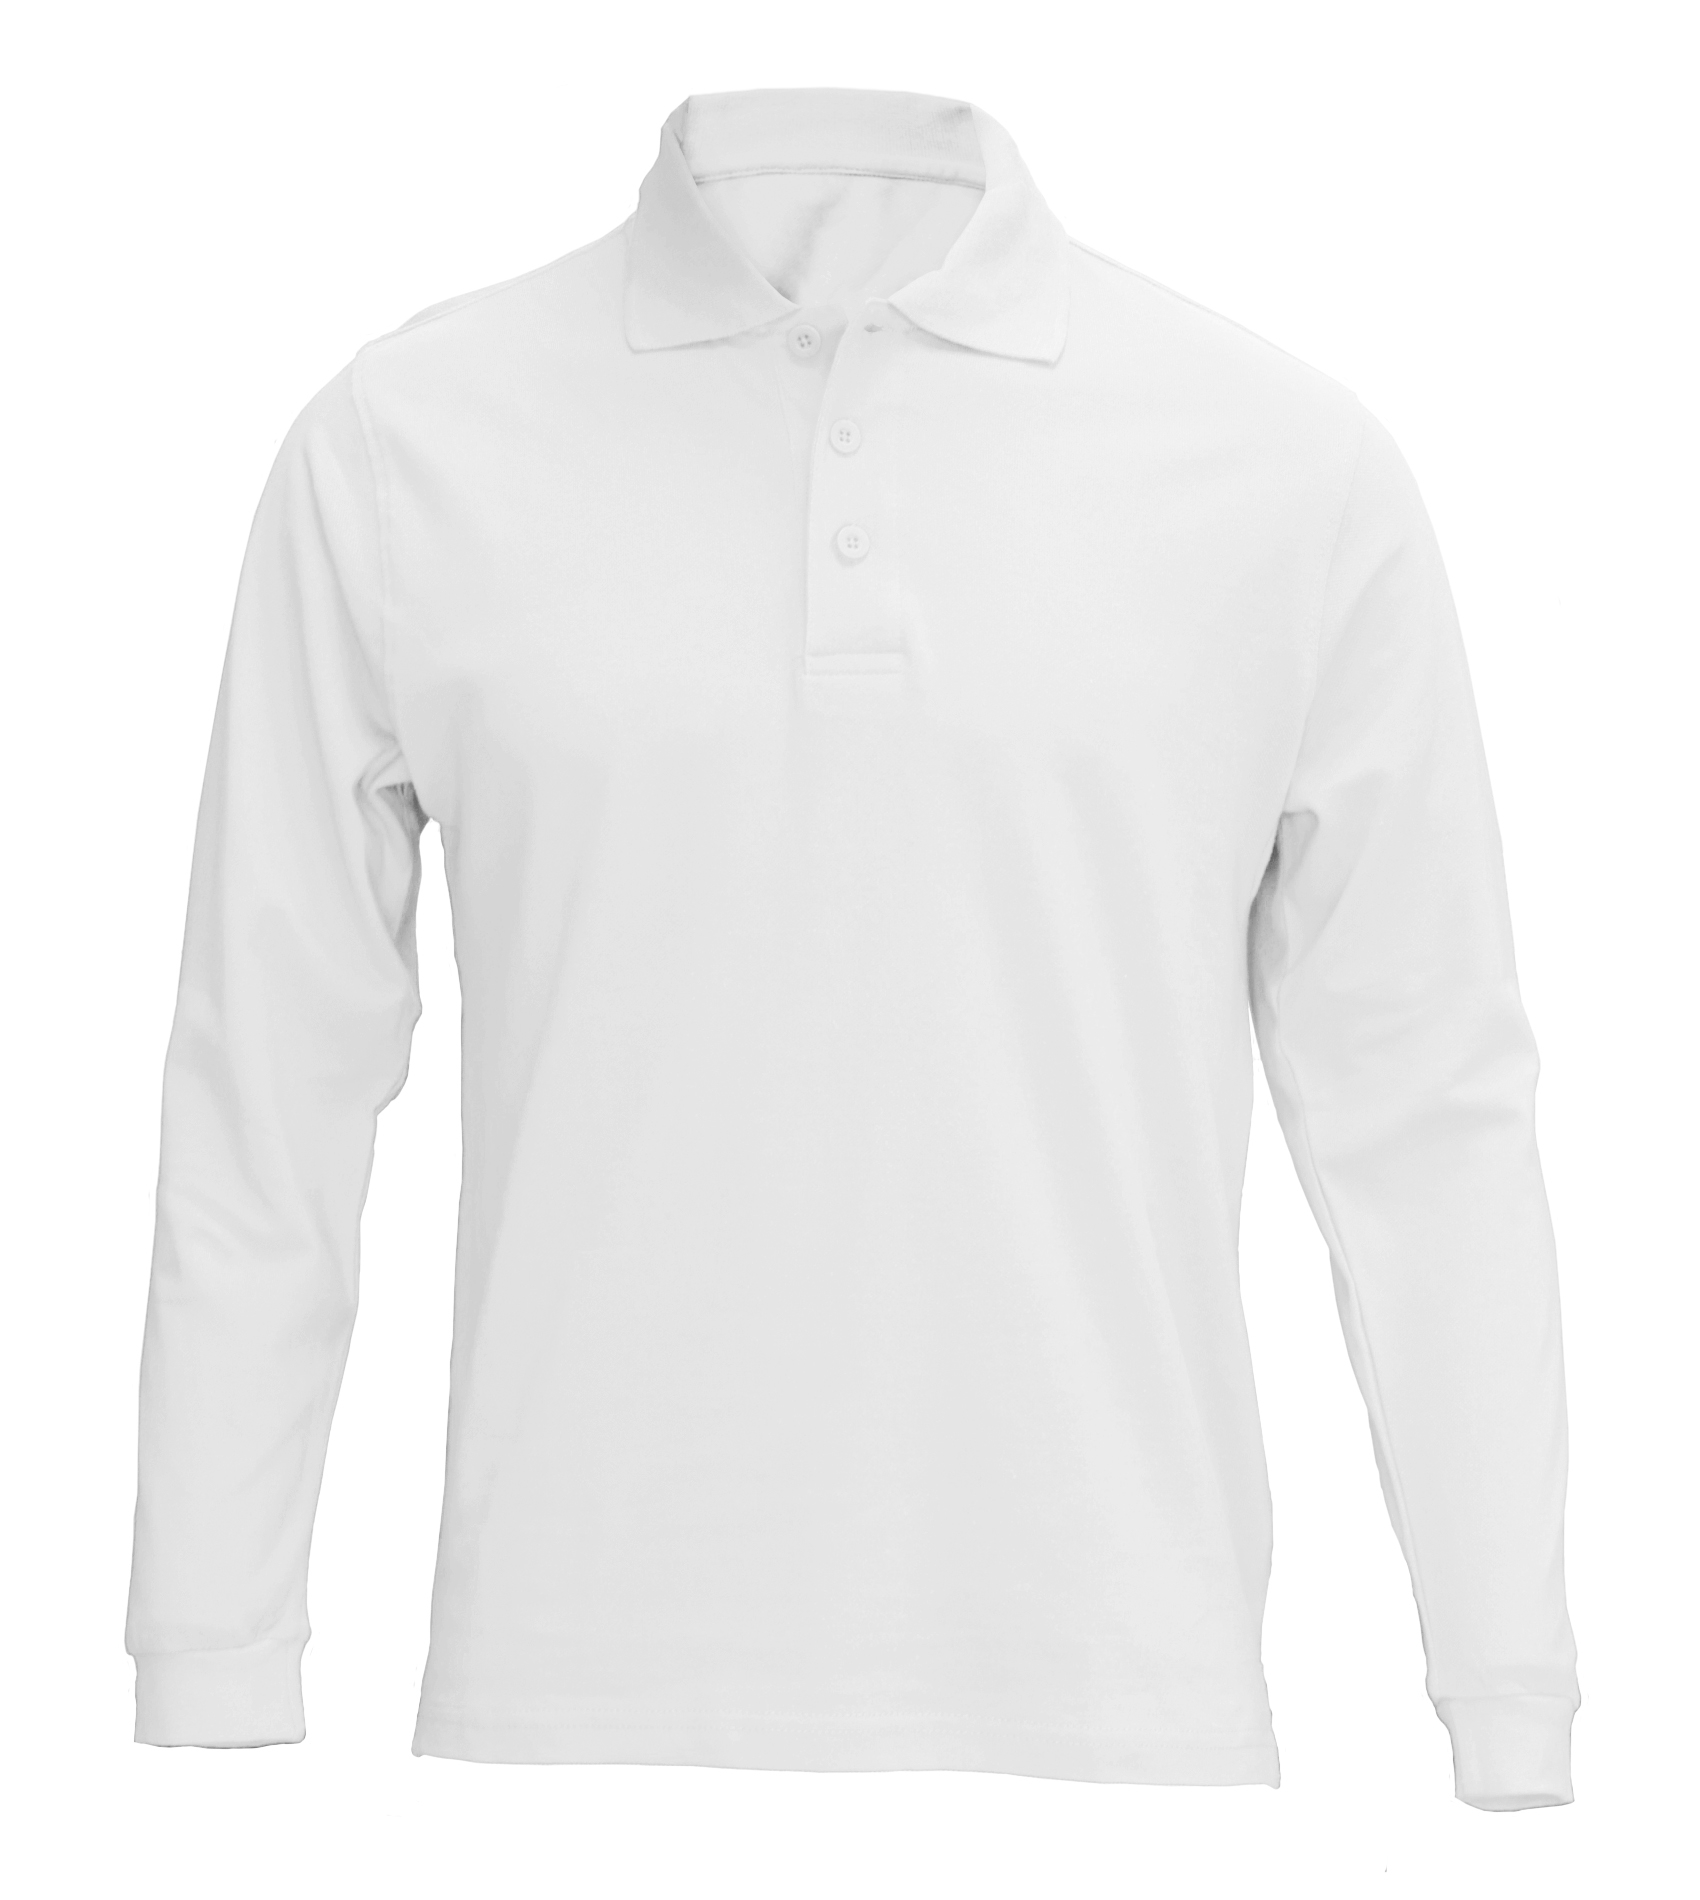 BAW Athletic Wear 985Y - Youth Classic Polo Long Sleeve